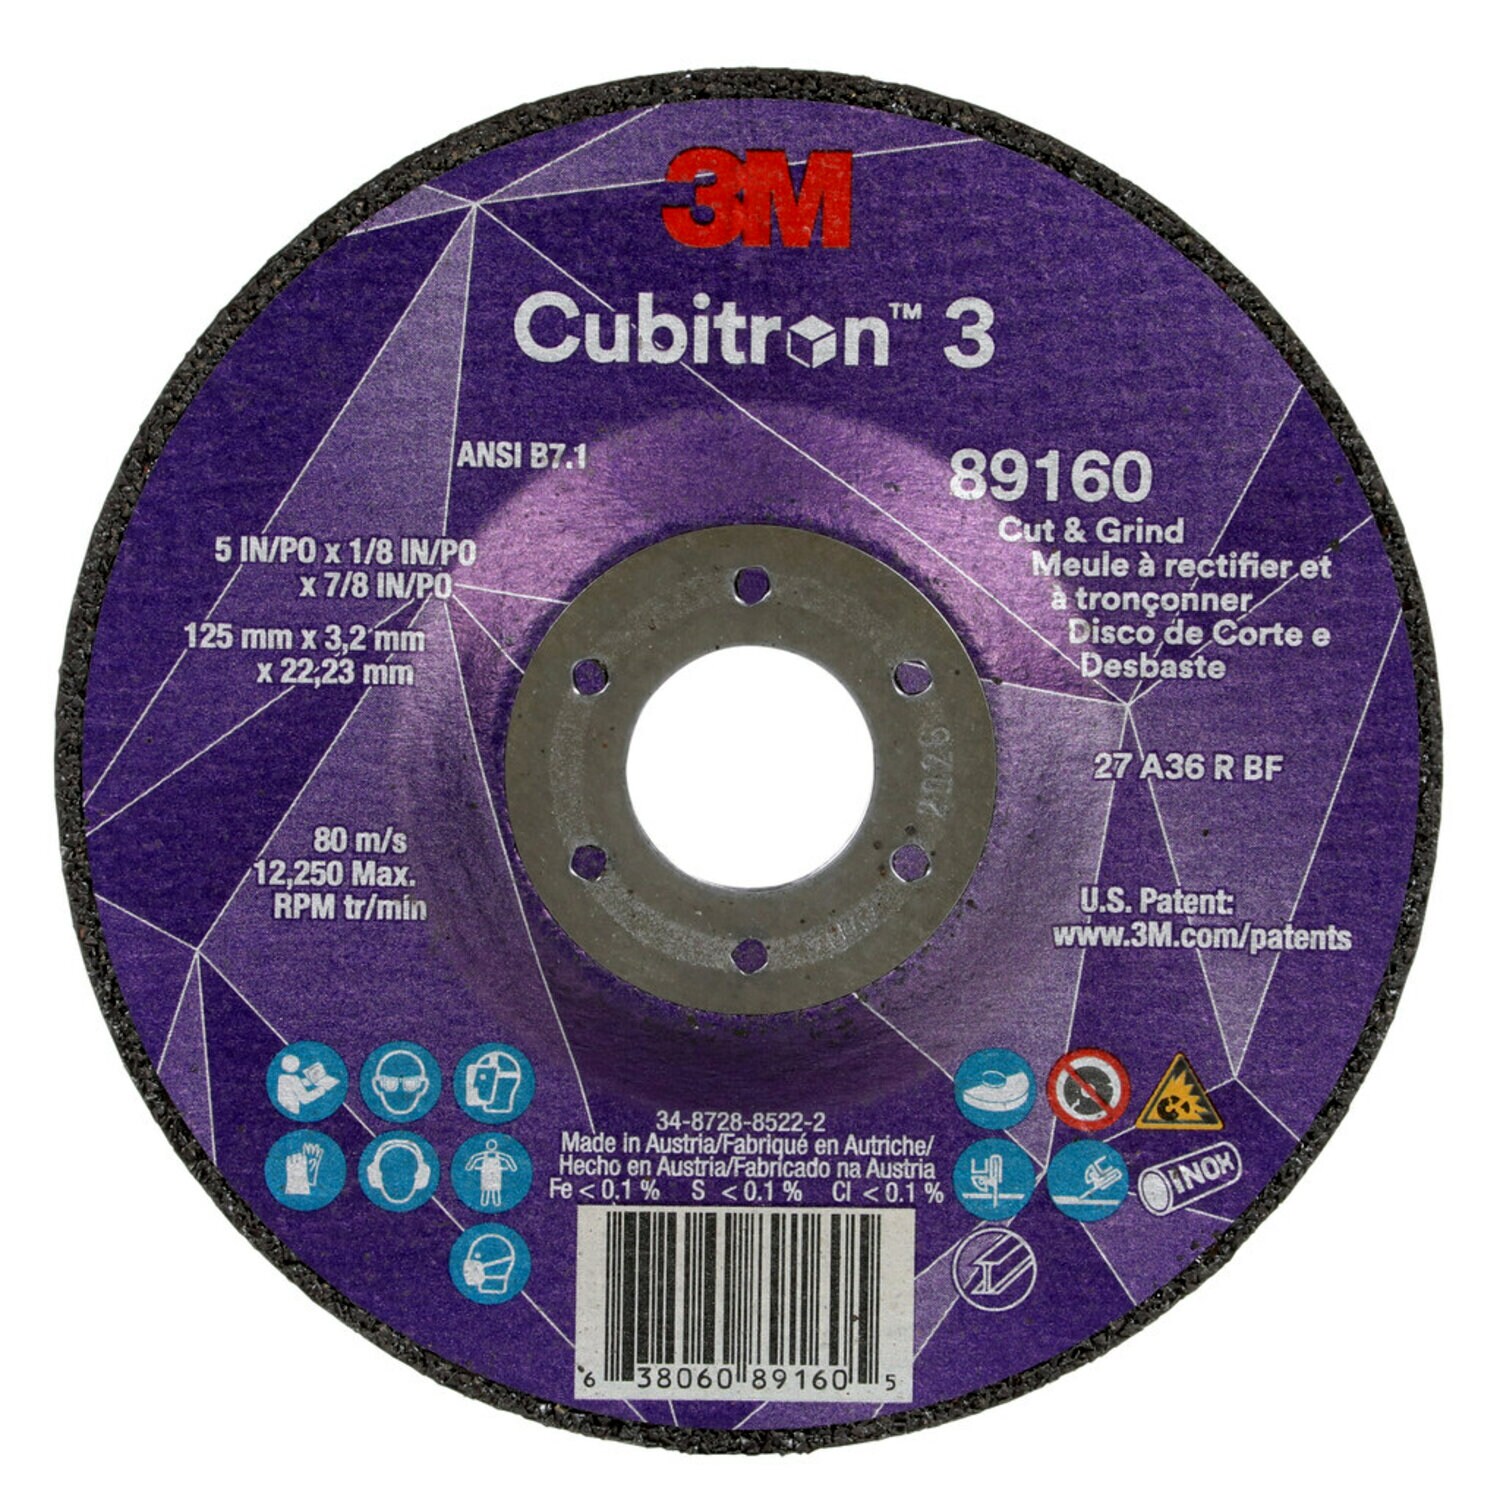 7100305151 - 3M Cubitron 3 Cut and Grind Wheel, 89160, 36+, T27, 5 in x 1/8 in x
7/8 in (125 x 3.2 x 22.23 mm), ANSI, 10/Pack, 20 ea/Case